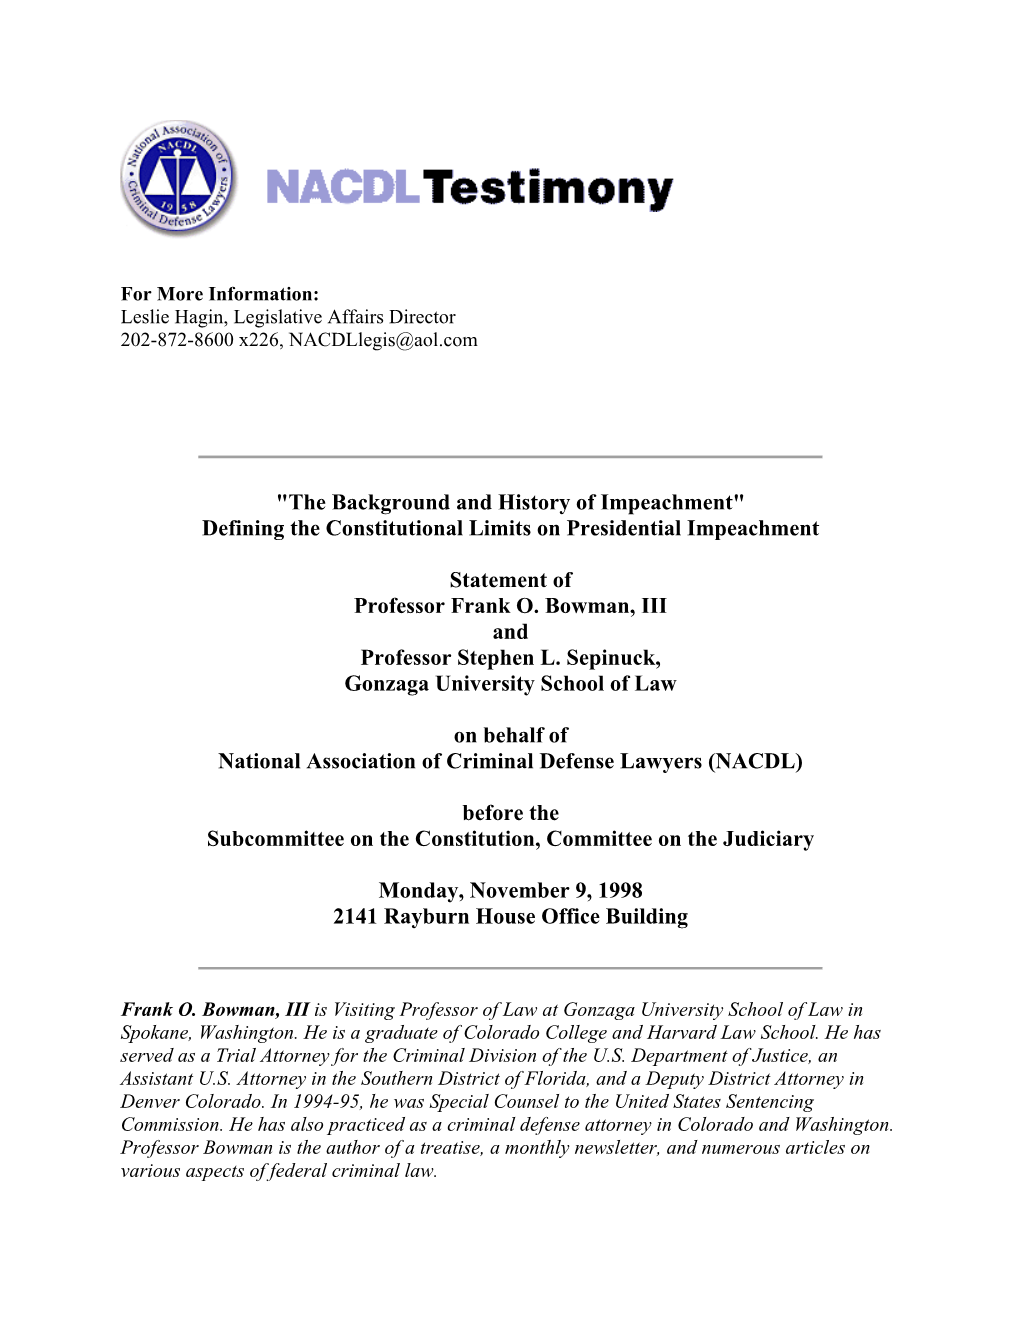 "The Background and History of Impeachment" Defining the Constitutional Limits on Presidential Impeachment